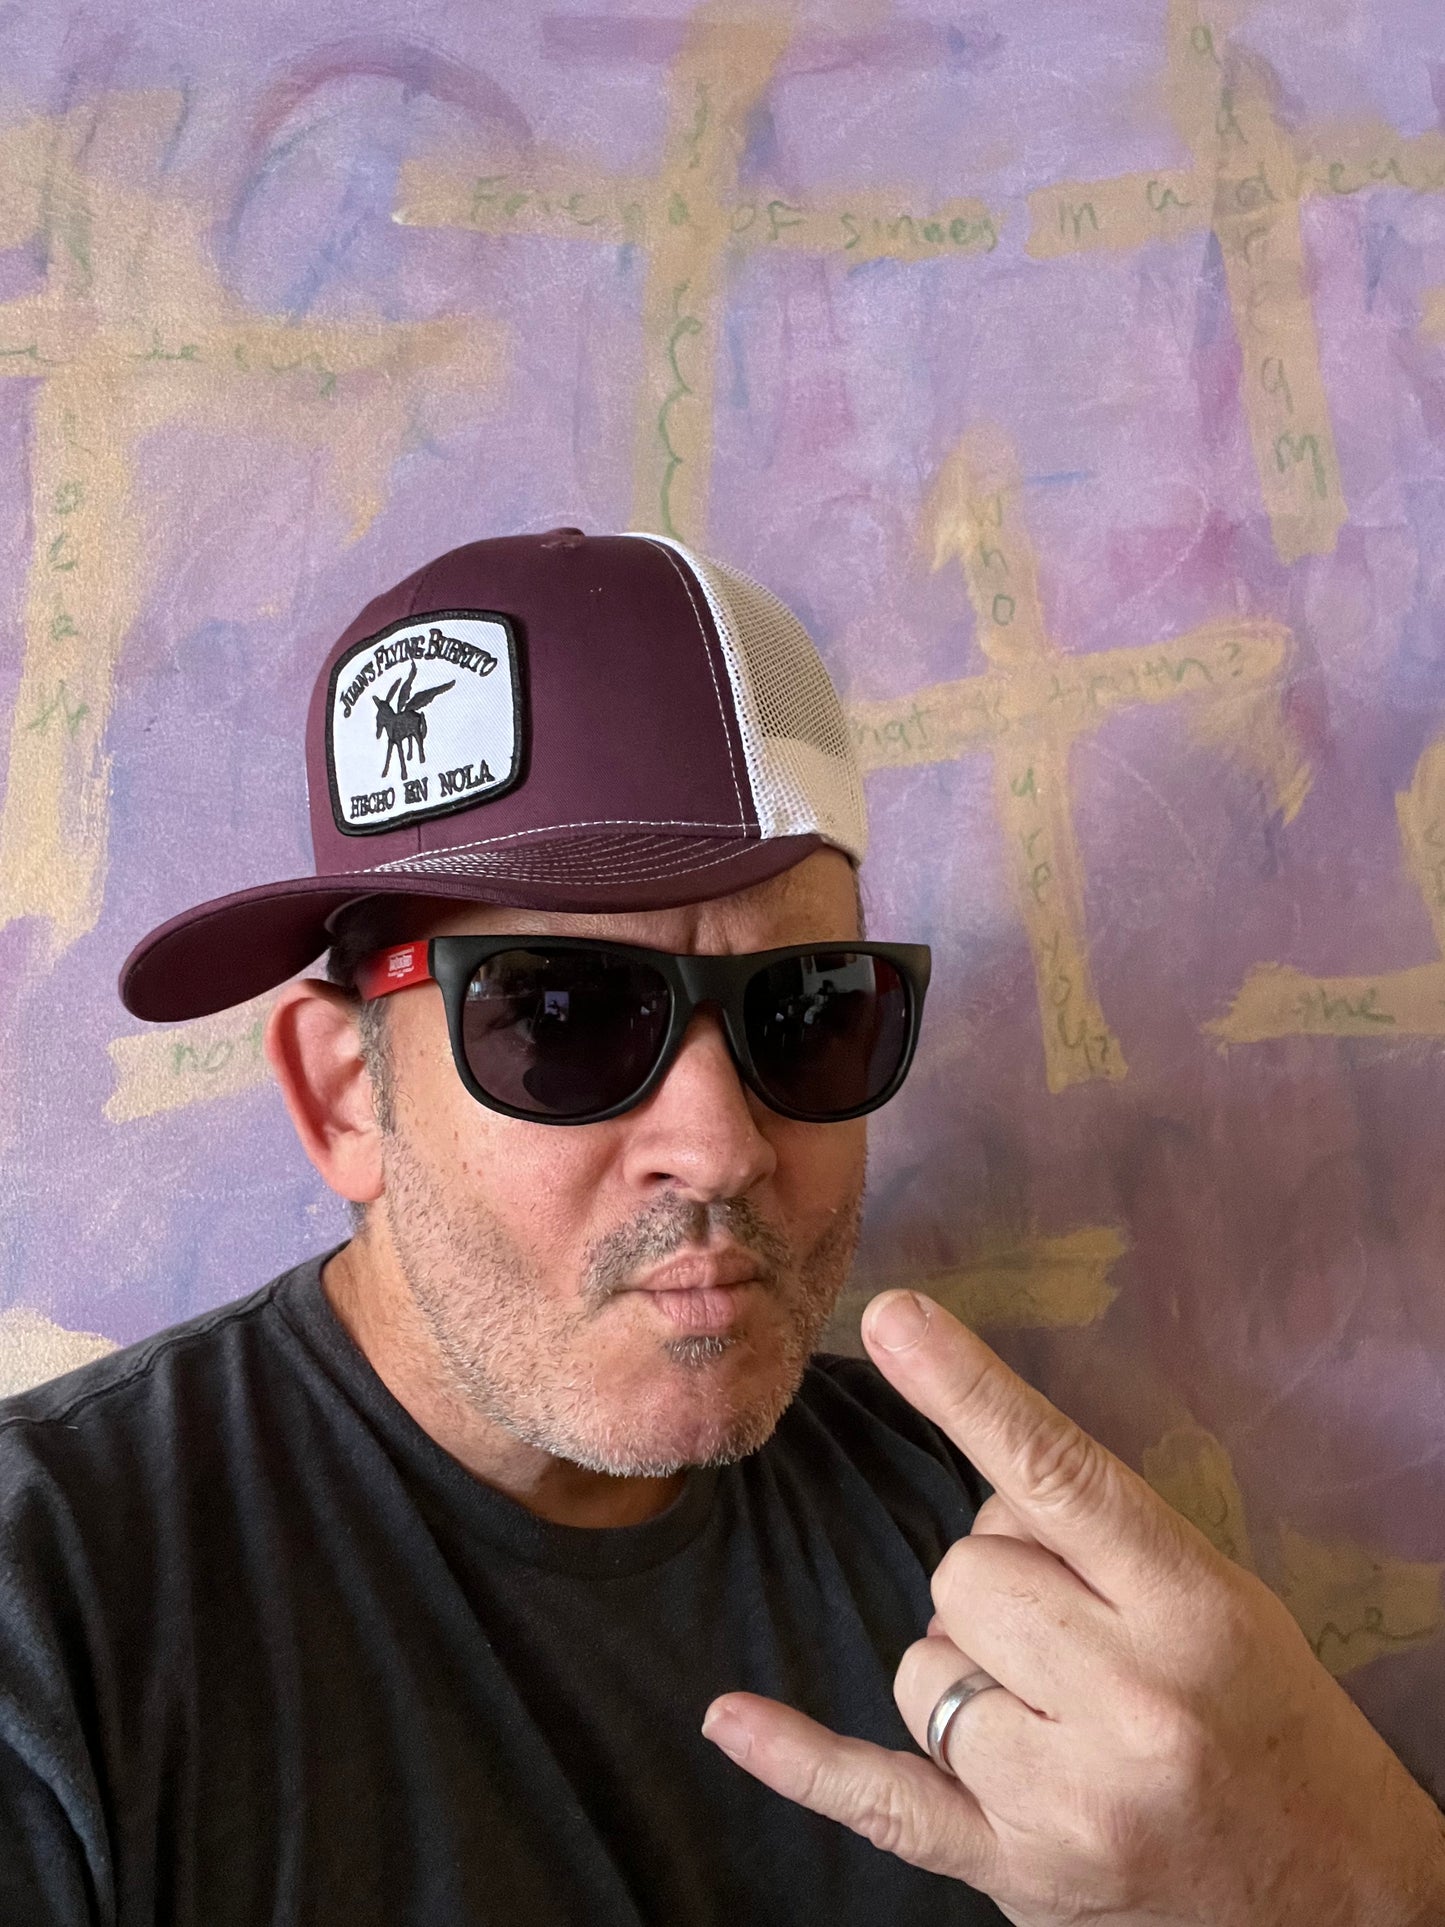 A picture of a total bro making rock&roll hand while wearing the two-tone maroon trucker cap with embroidered "hecho" patch logo